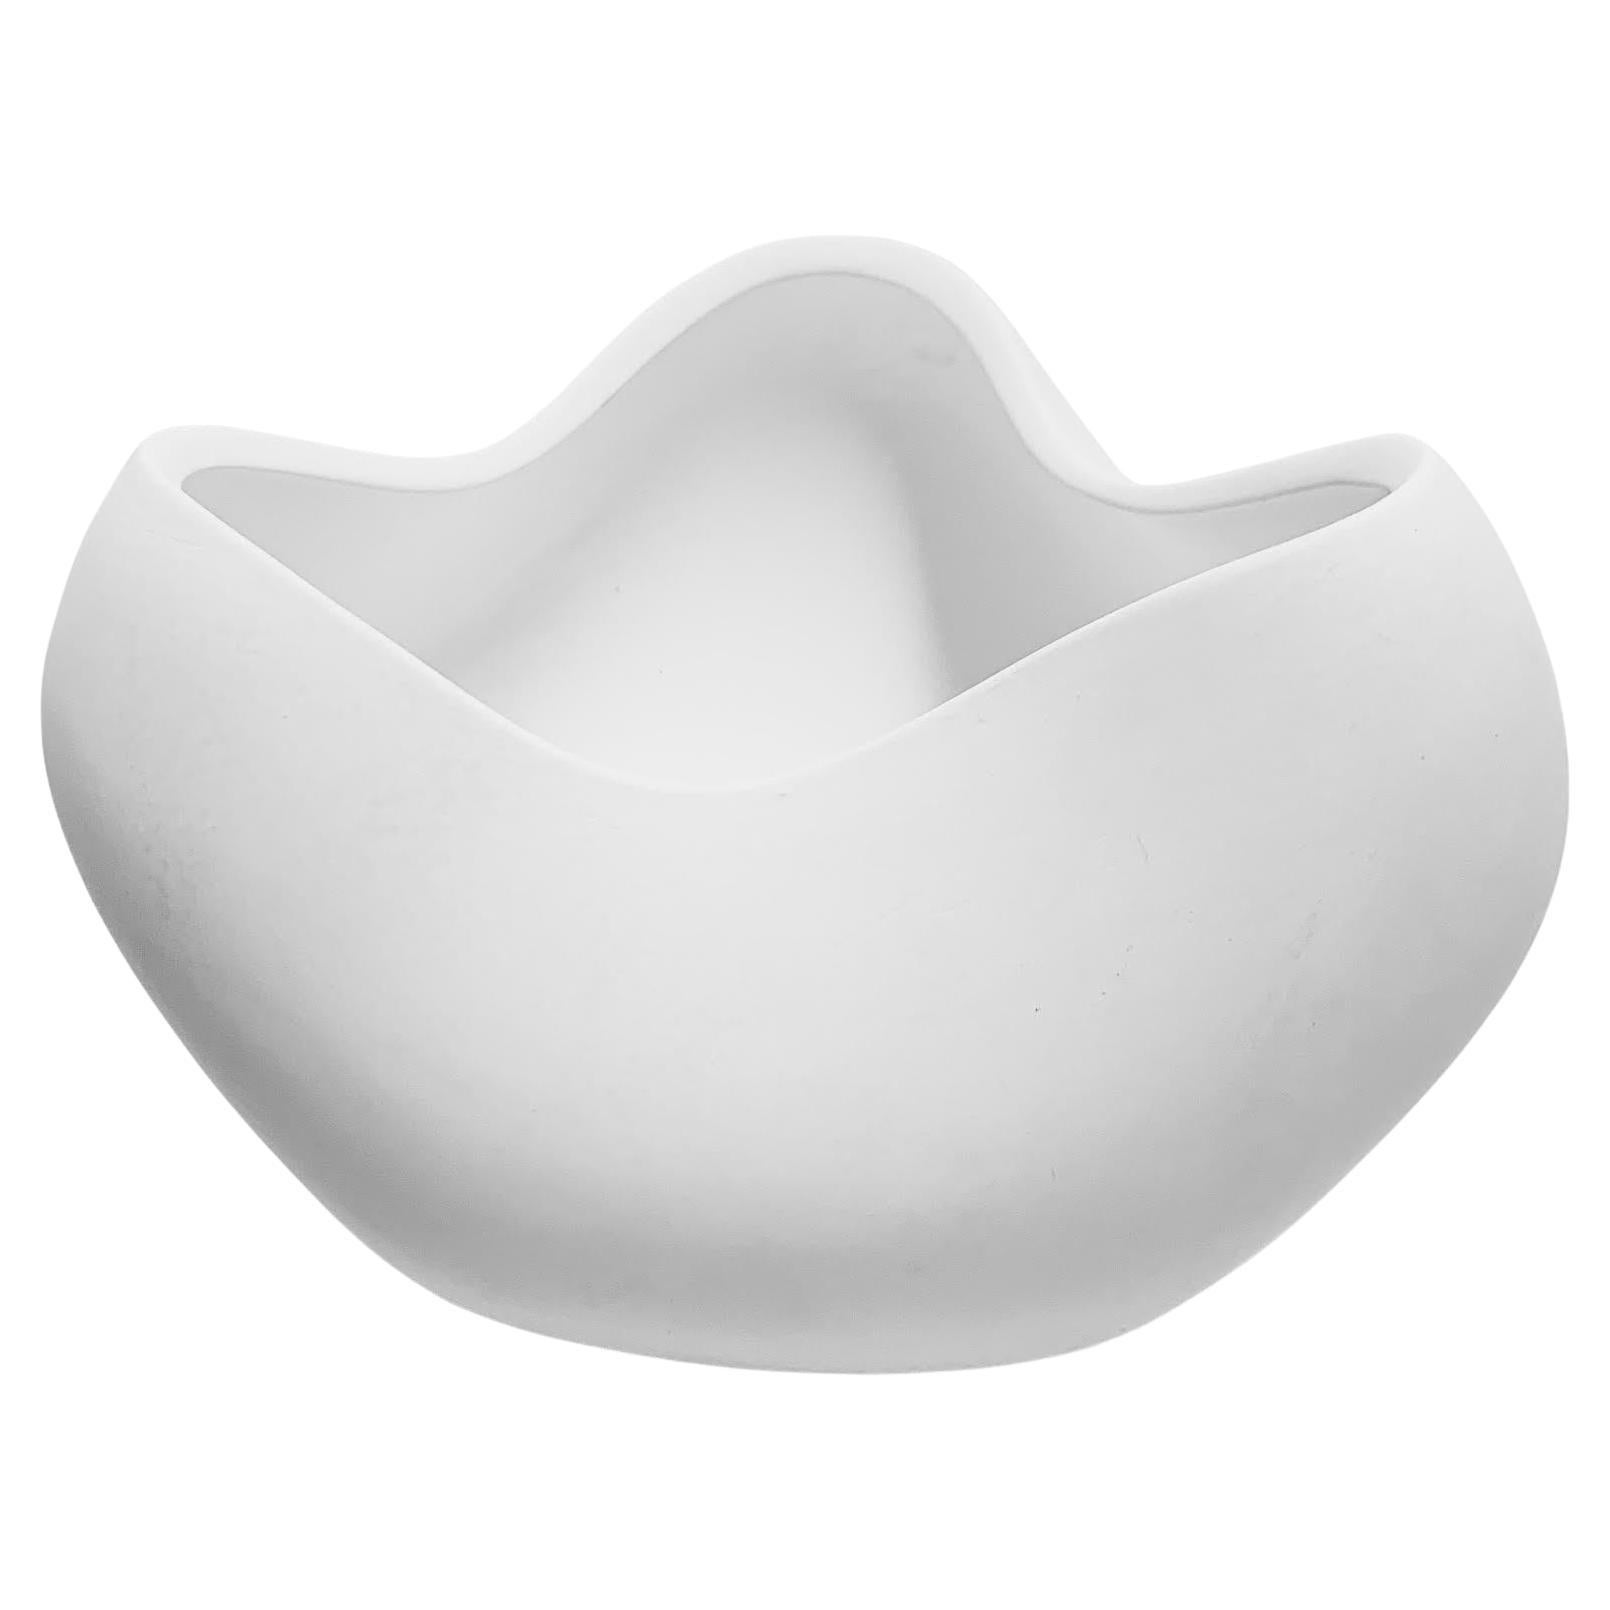 White Smooth Finish Curved Shaped Danish Design Bowl, China, Contemporary